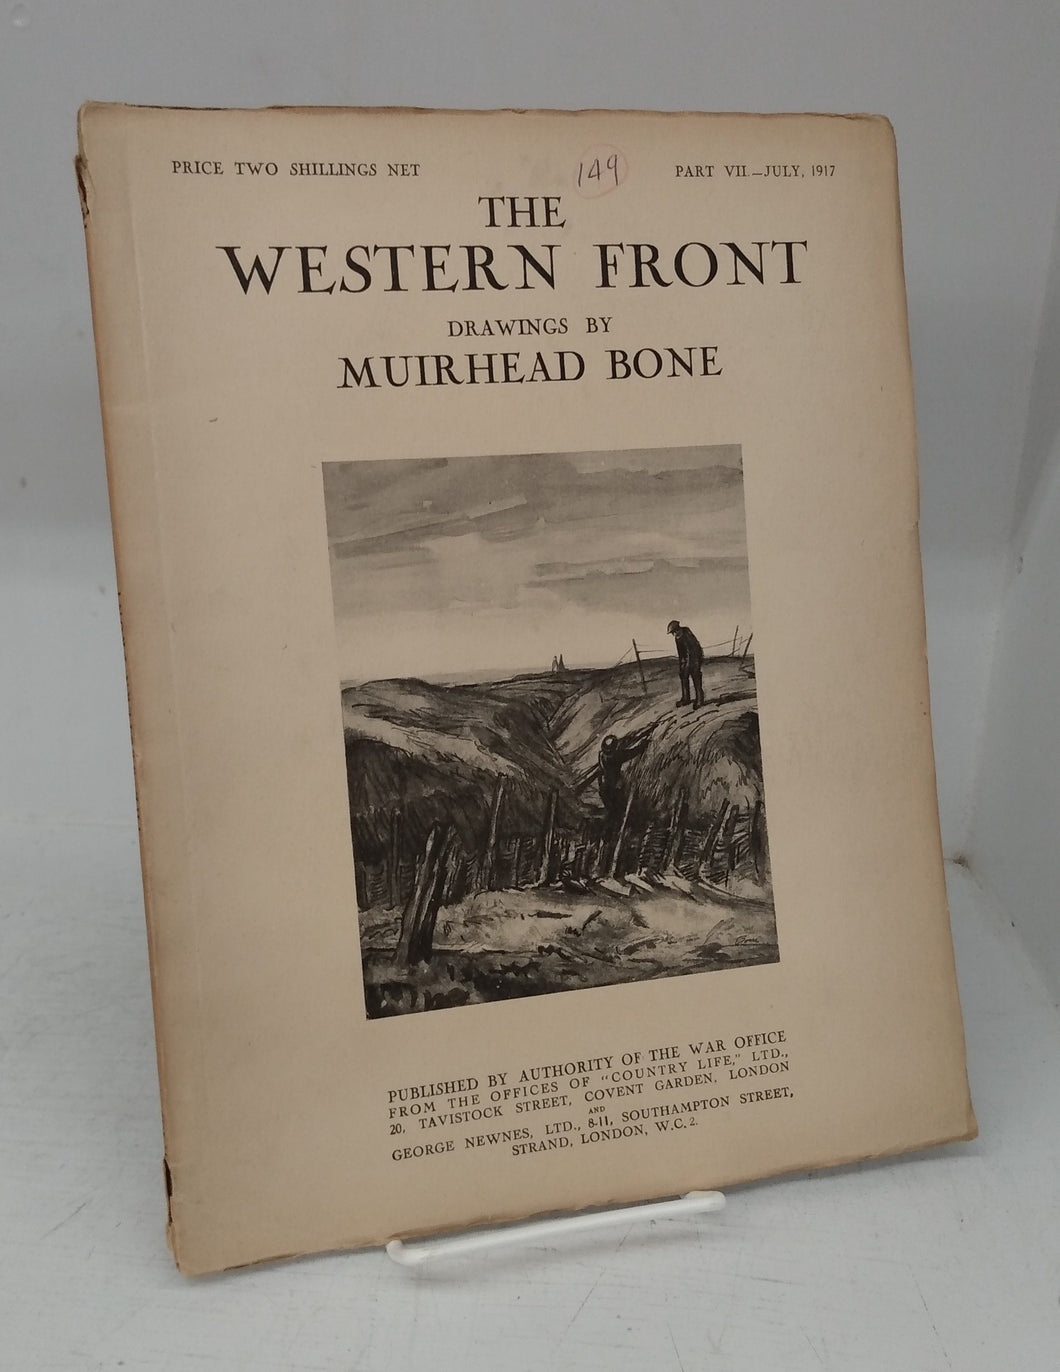 The Western Front: Drawings by Muirhead Bone, Part VII - July 1917